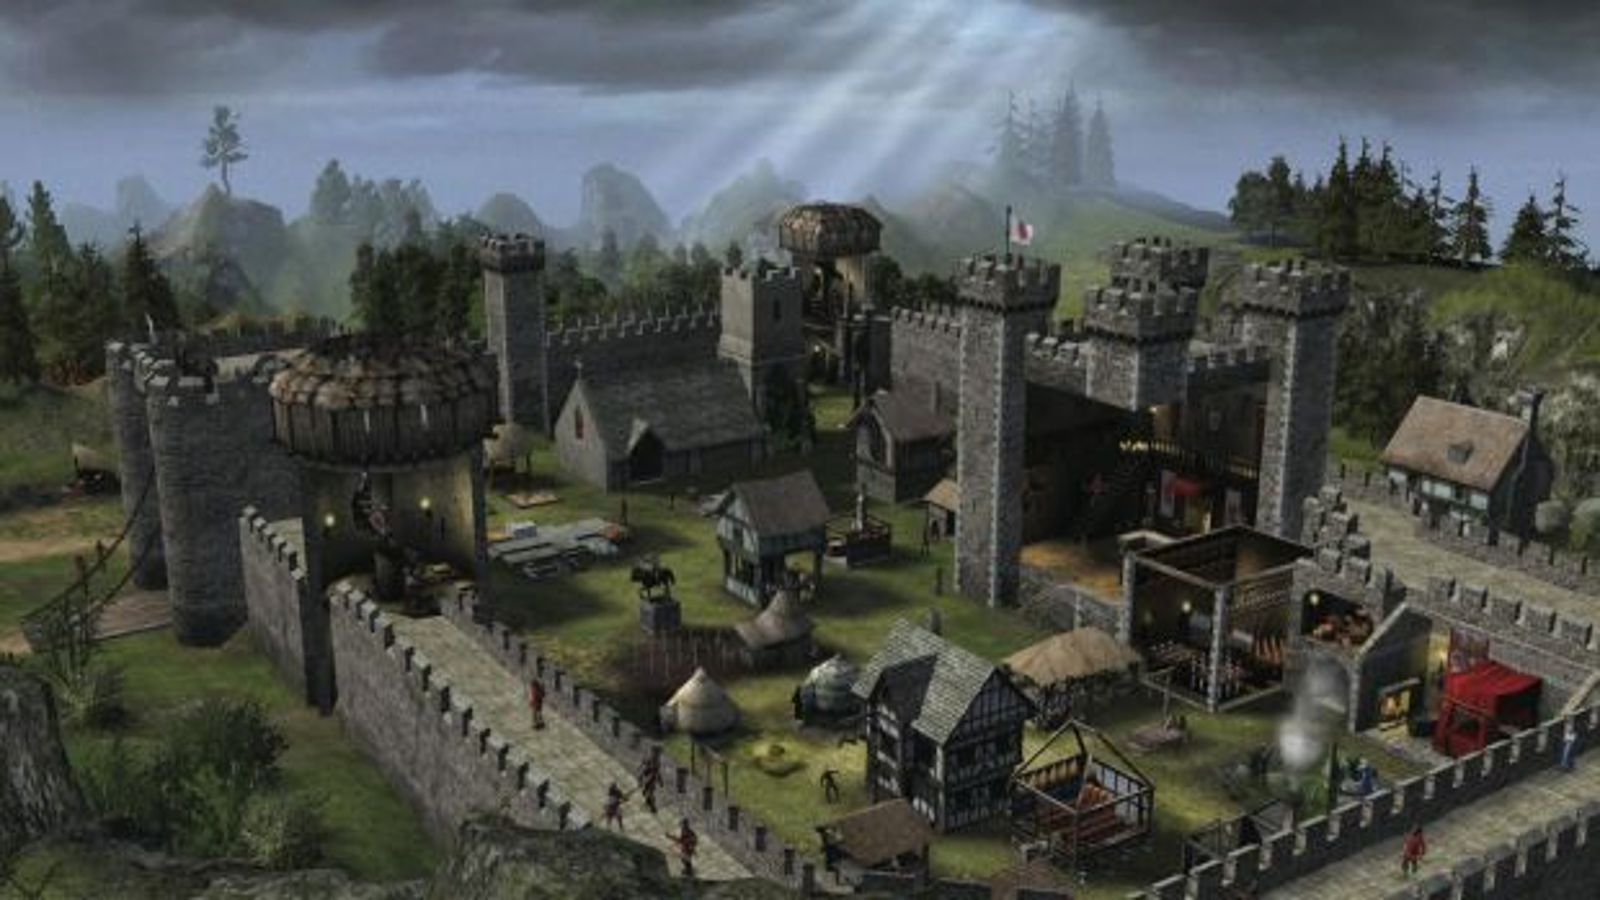 Stronghold 2: Steam Edition on Steam